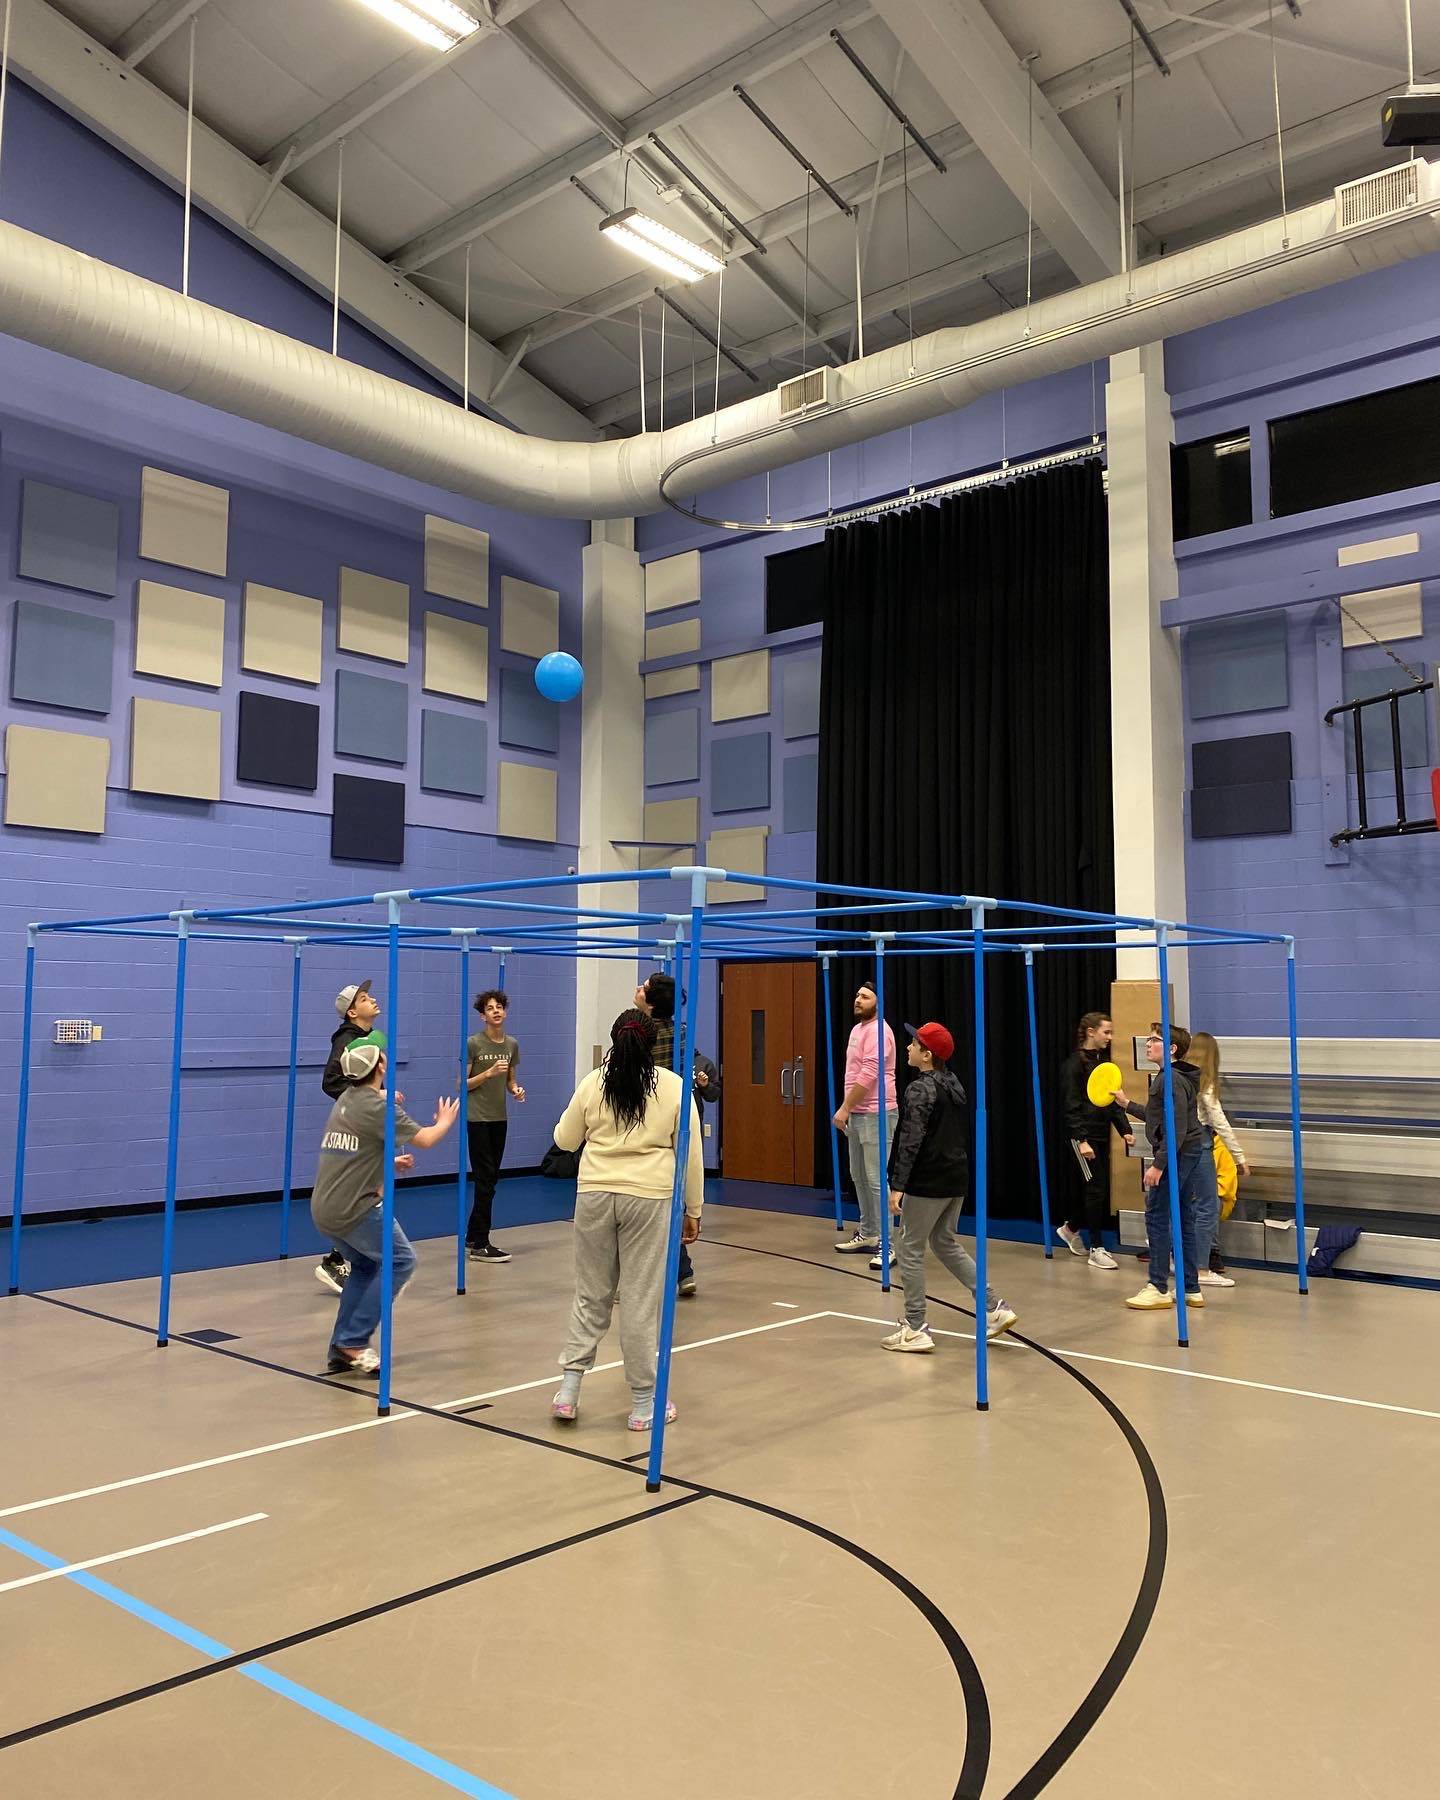 PE games like 9 Square in the Air are ideal for building connection and self-esteem in students.